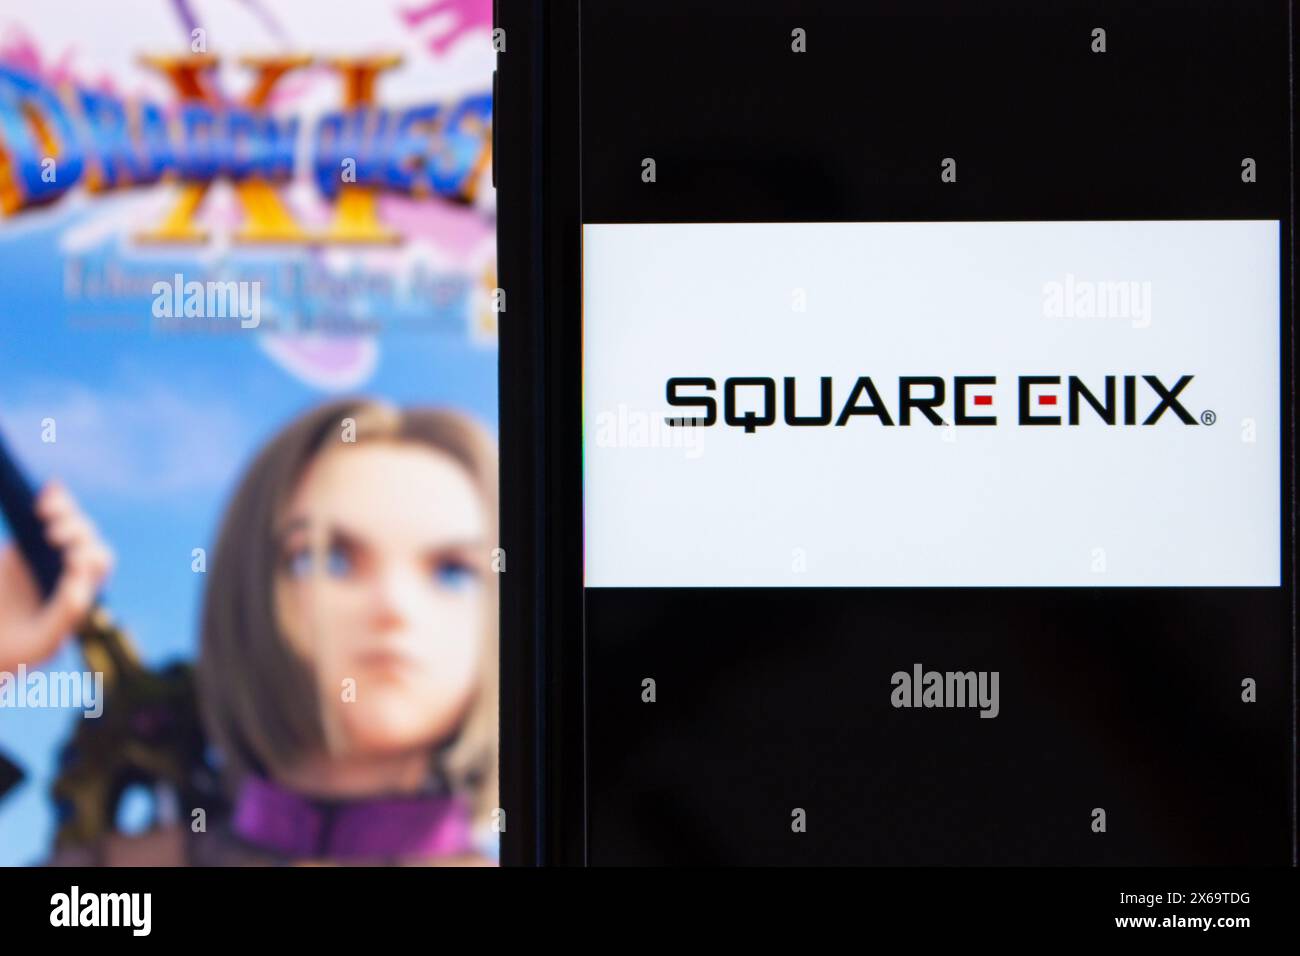 Square Enix company concept image. Leading Japanese game publisher, famous for RPG games like Final Fantasy and Dragon Quest. Video game industry Stock Photo